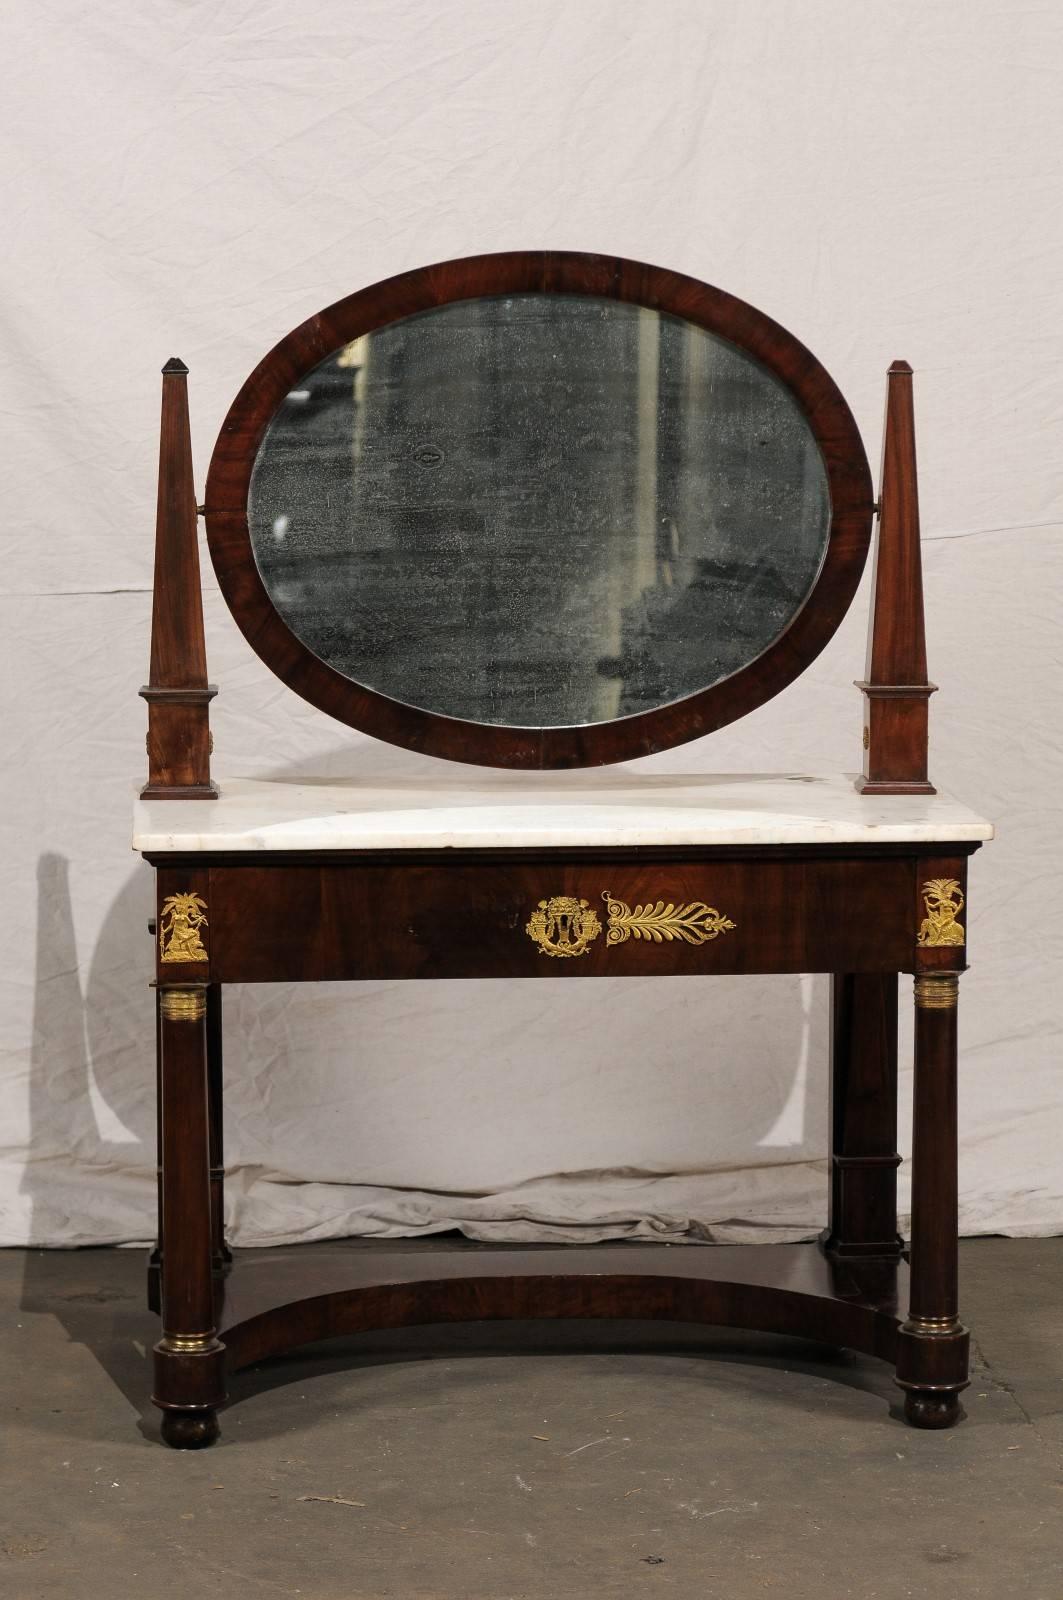 19th century French Empire flame mahogany marble top dressing table with oval mirror and one drawer.